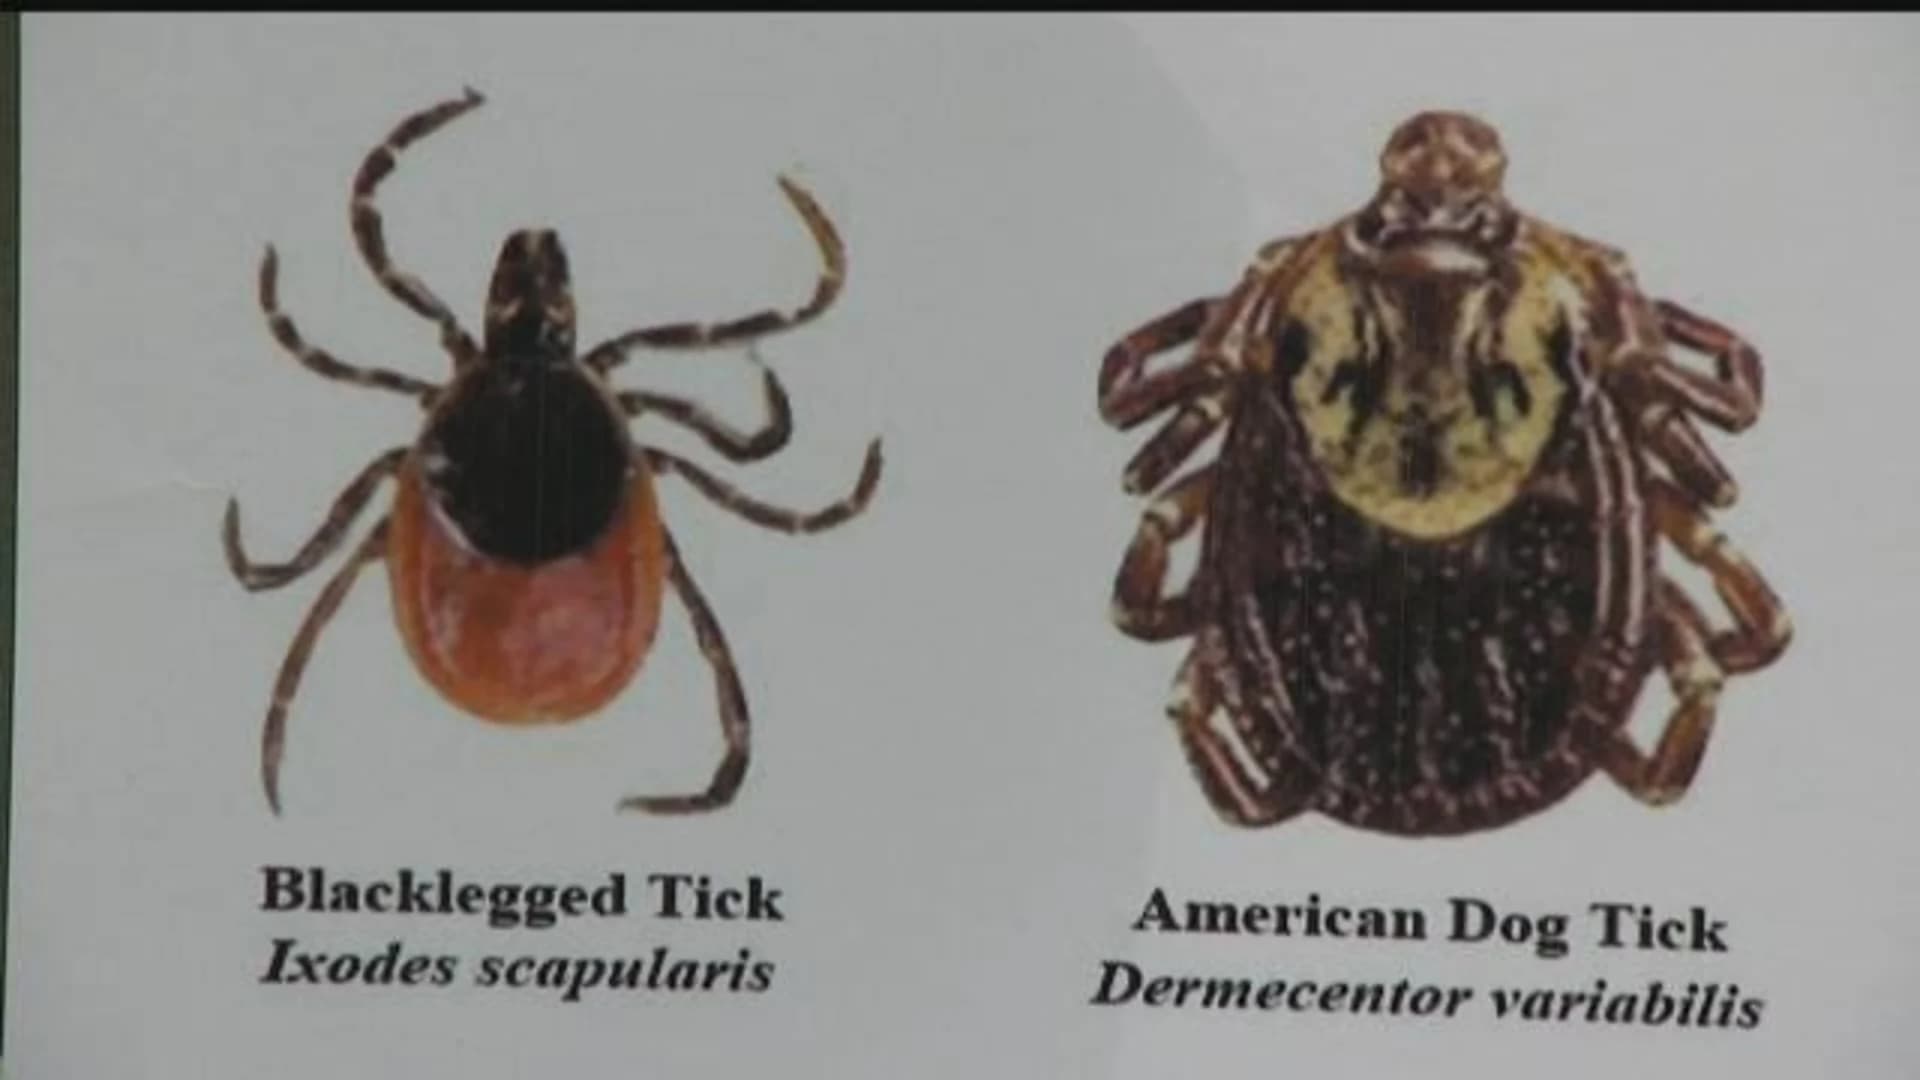 Blumenthal: Rate of detection for Lyme disease in ticks increased